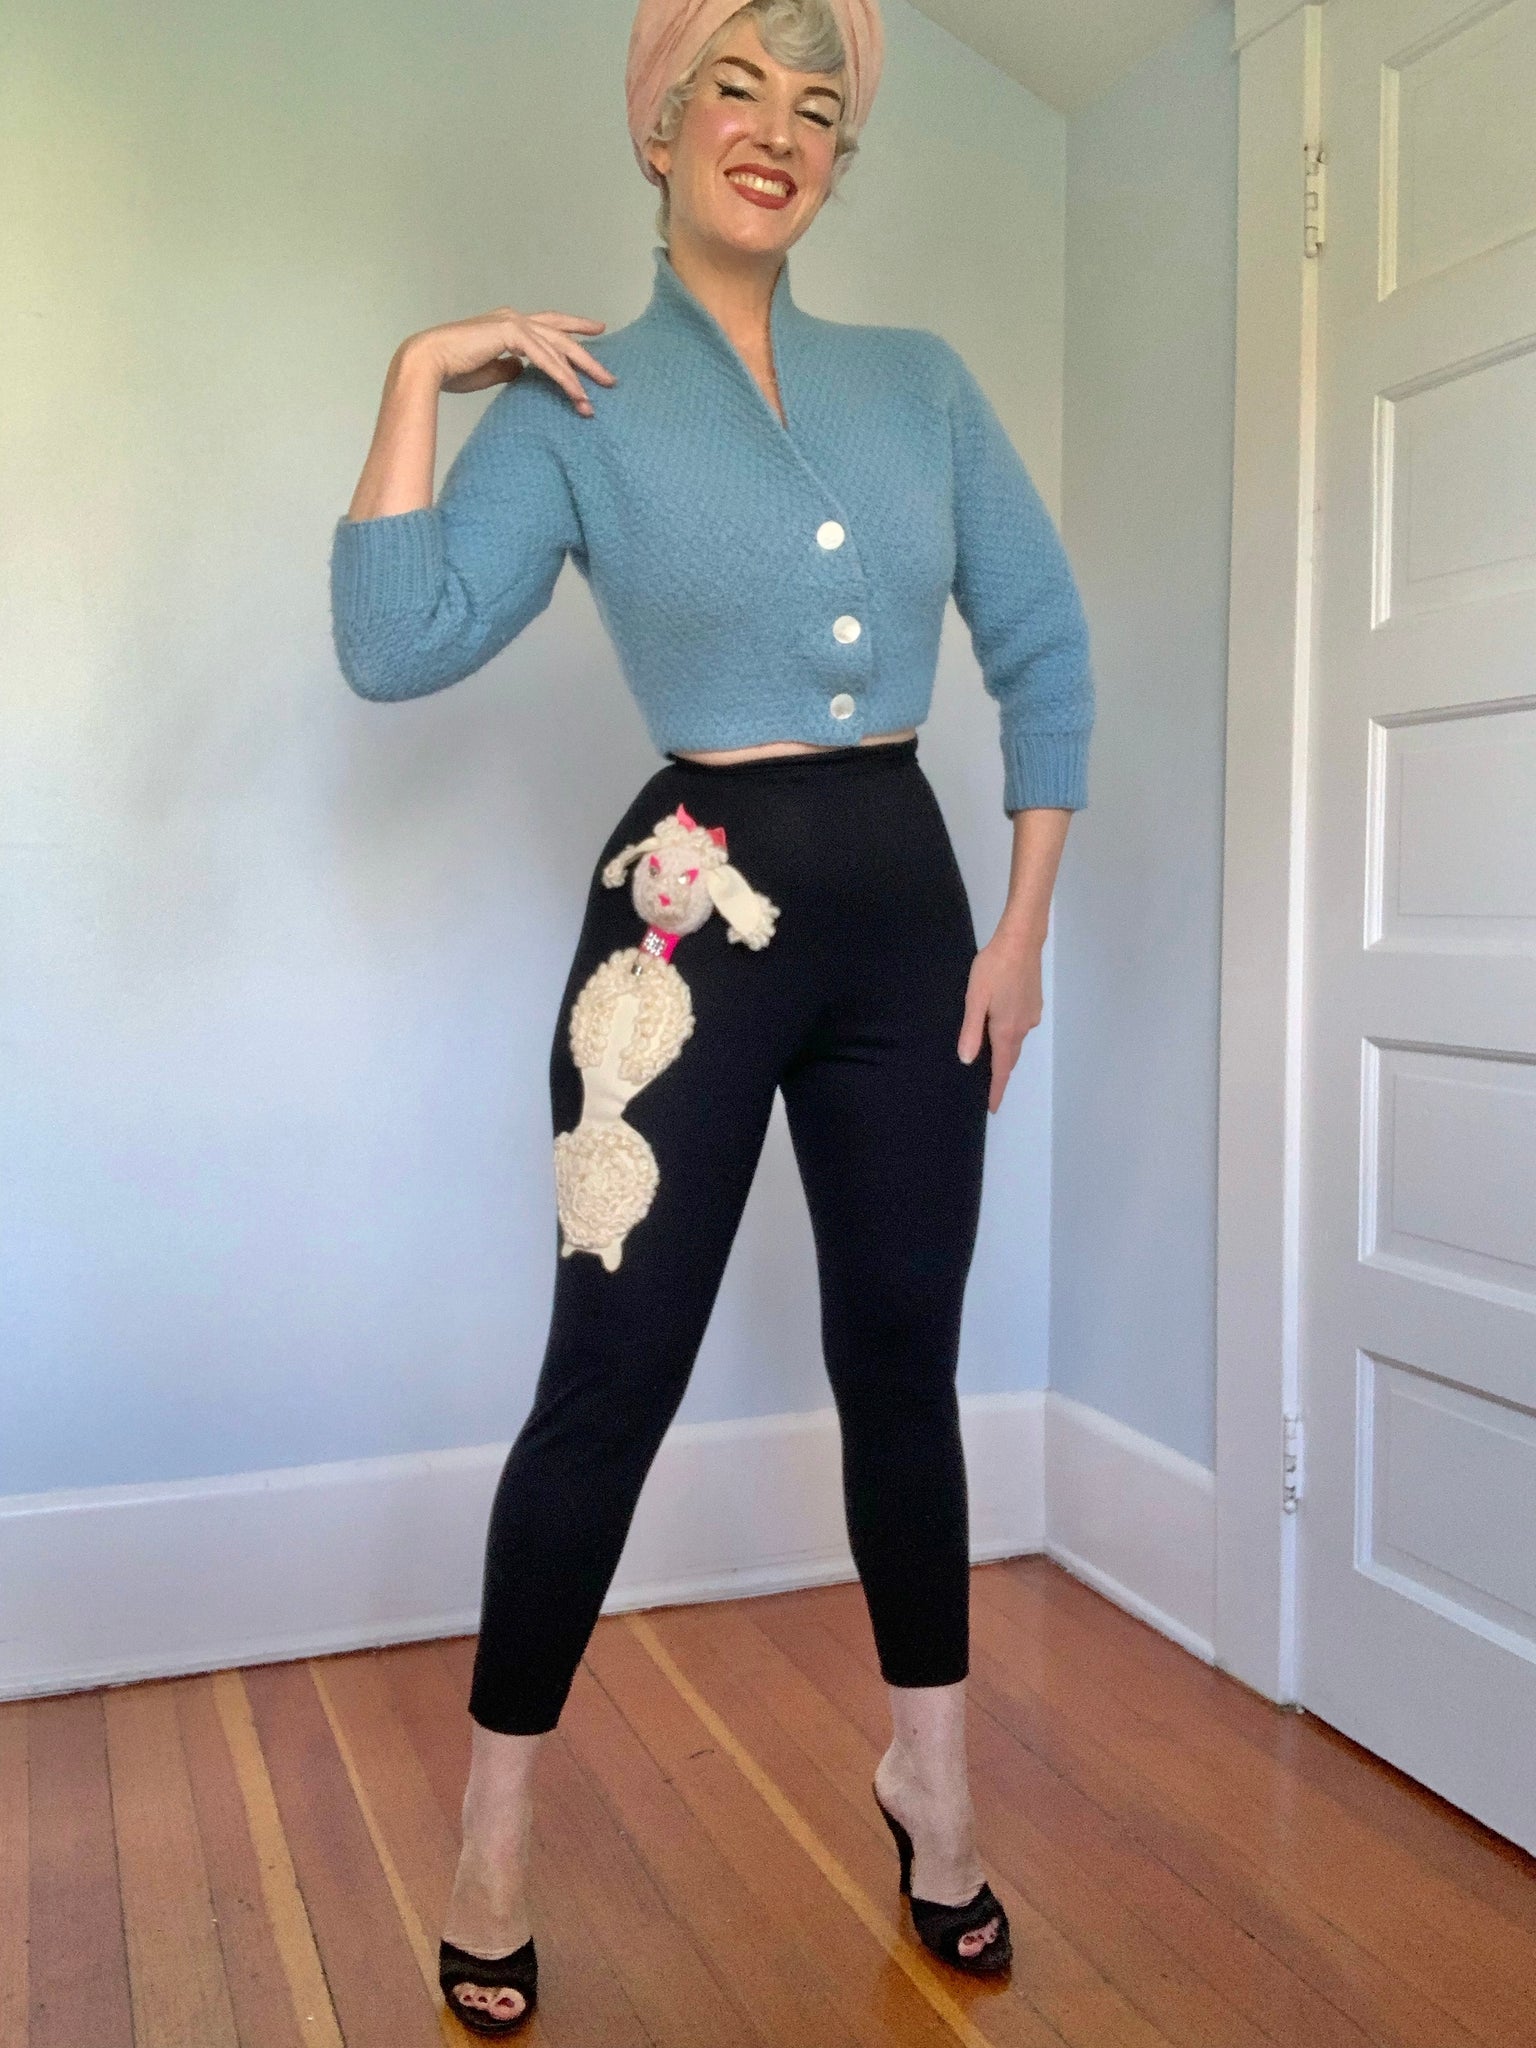 Deadstock 1950s Wool Jersey High Waisted Cigarette Pants w/ Hand Embellished Poodle by “Originals by Margie Webb”